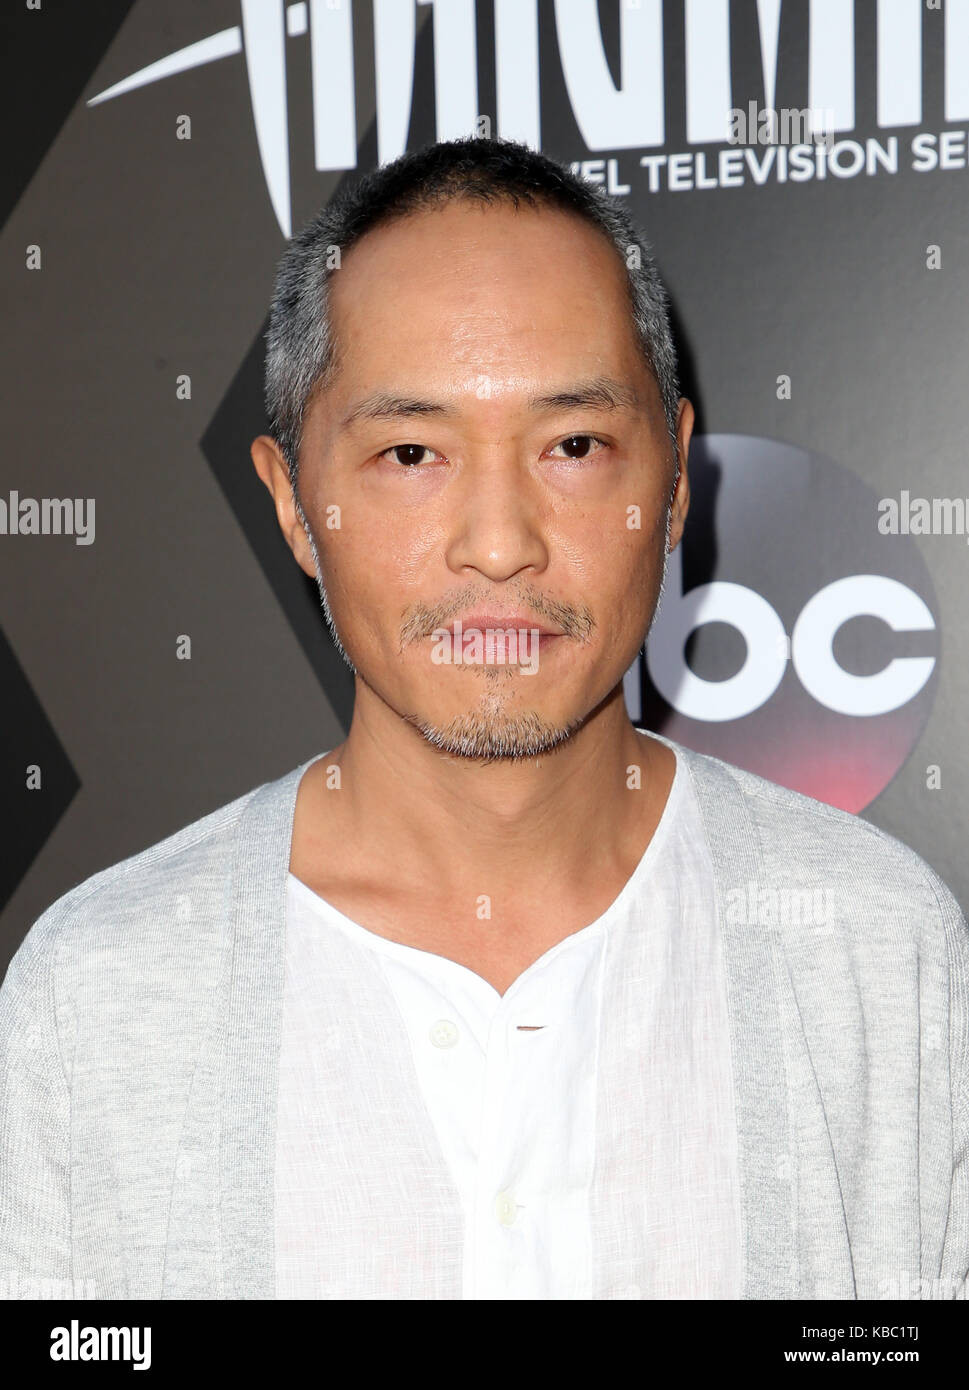 Premiere of ABC and Marvel's 'Inhumans' - Arrivals  Featuring: Ken Leung Where: Universal City, California, United States When: 28 Aug 2017 Credit: FayesVision/WENN.com Stock Photo